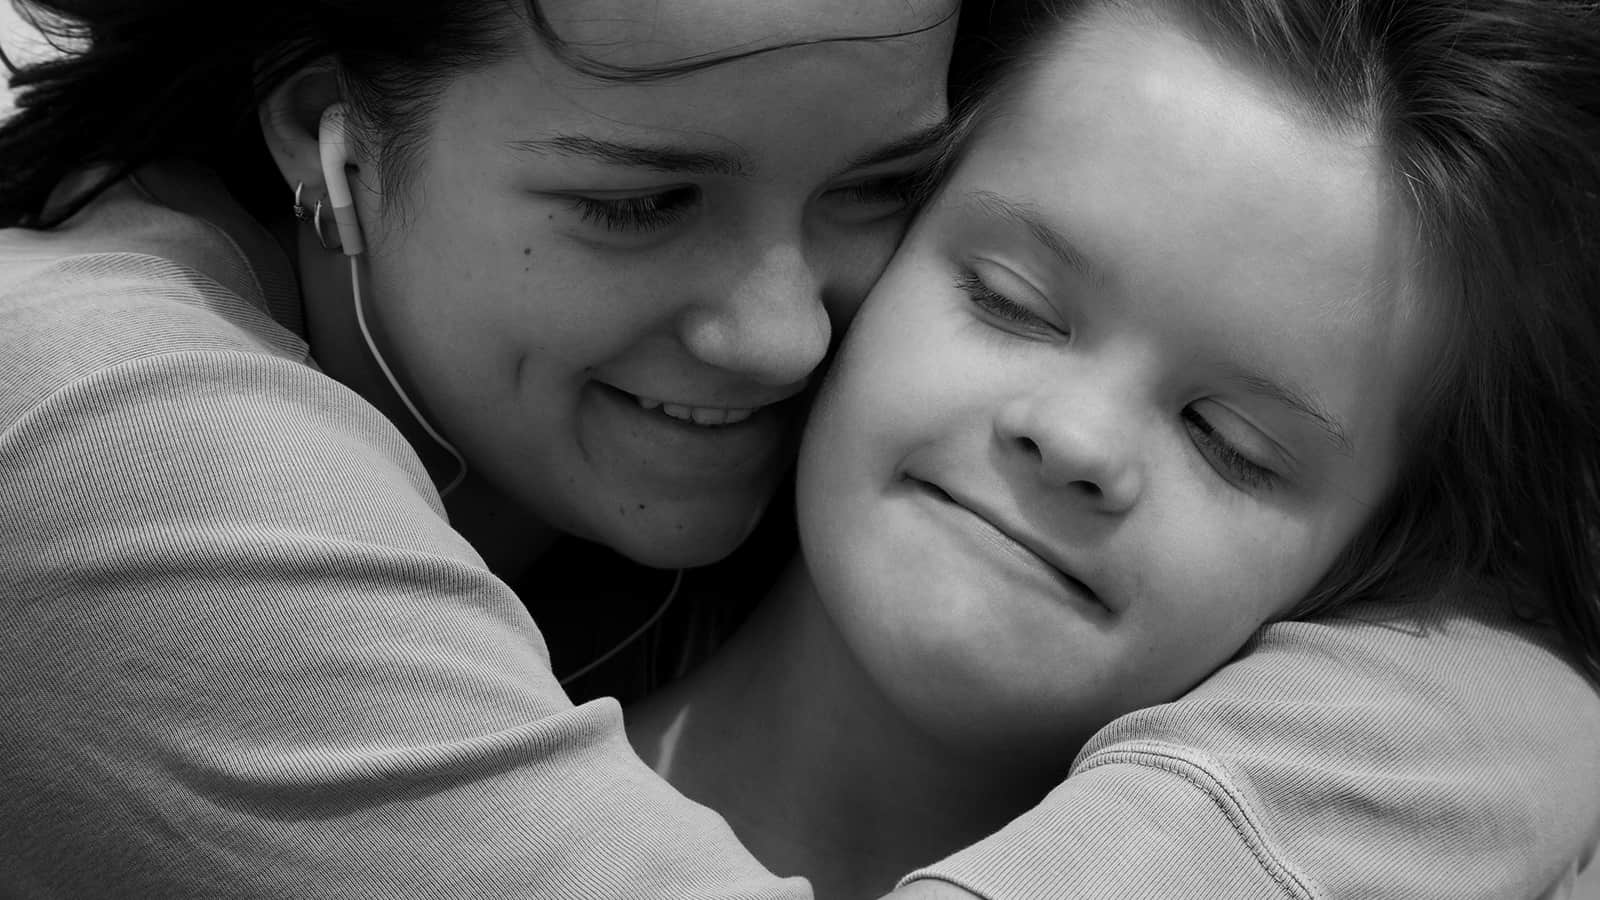 People With a Disabled Sibling Have More Empathy, According to Psychology